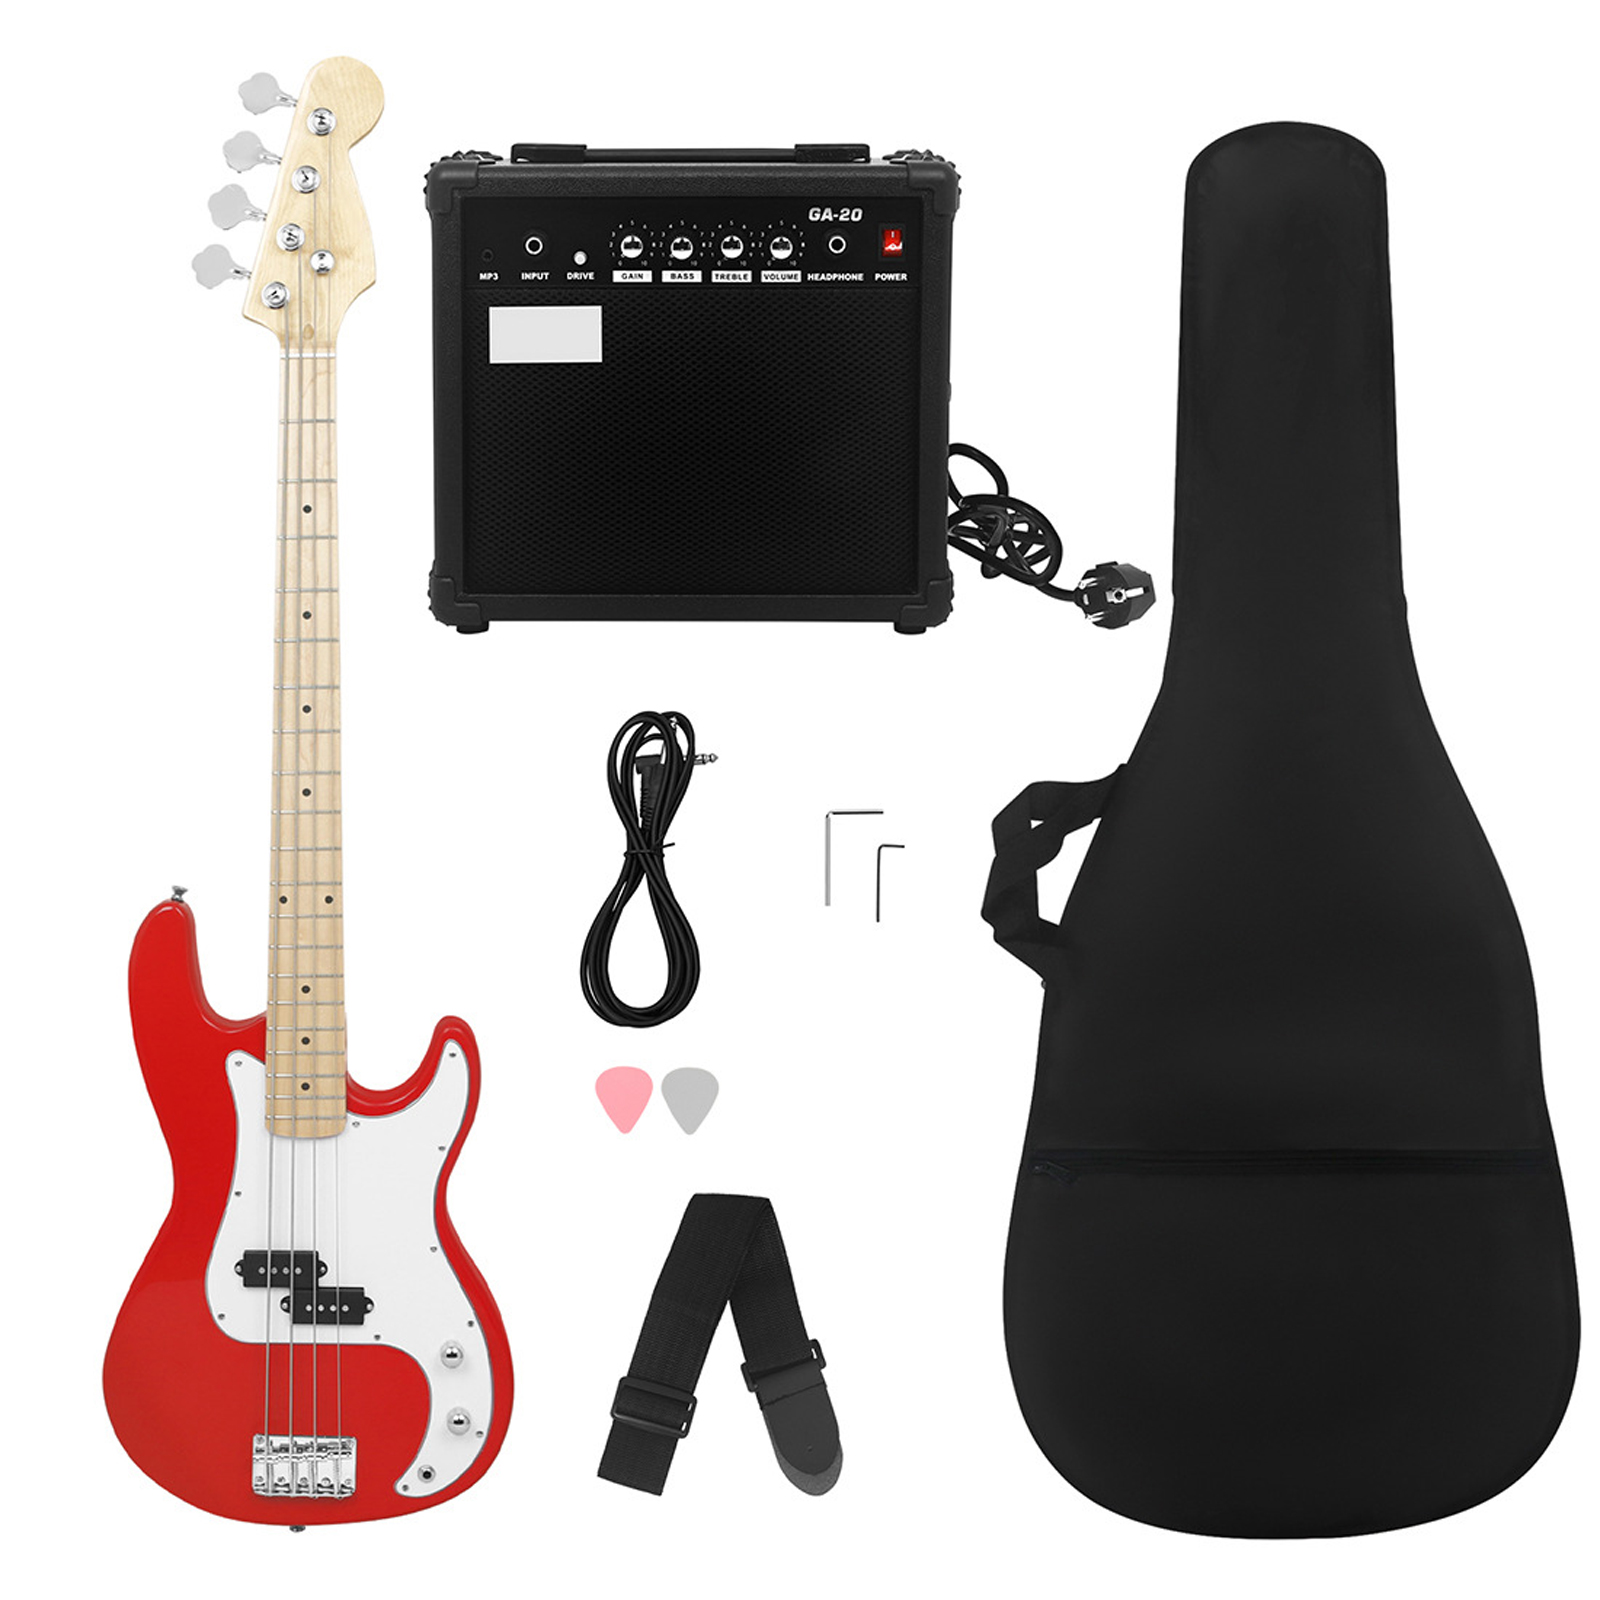 Electric Guitar Professional 4 String Exquisite Stylish Bass Guitar Music Equipment With Power Line Bag Wrench Tool Sunset black edge